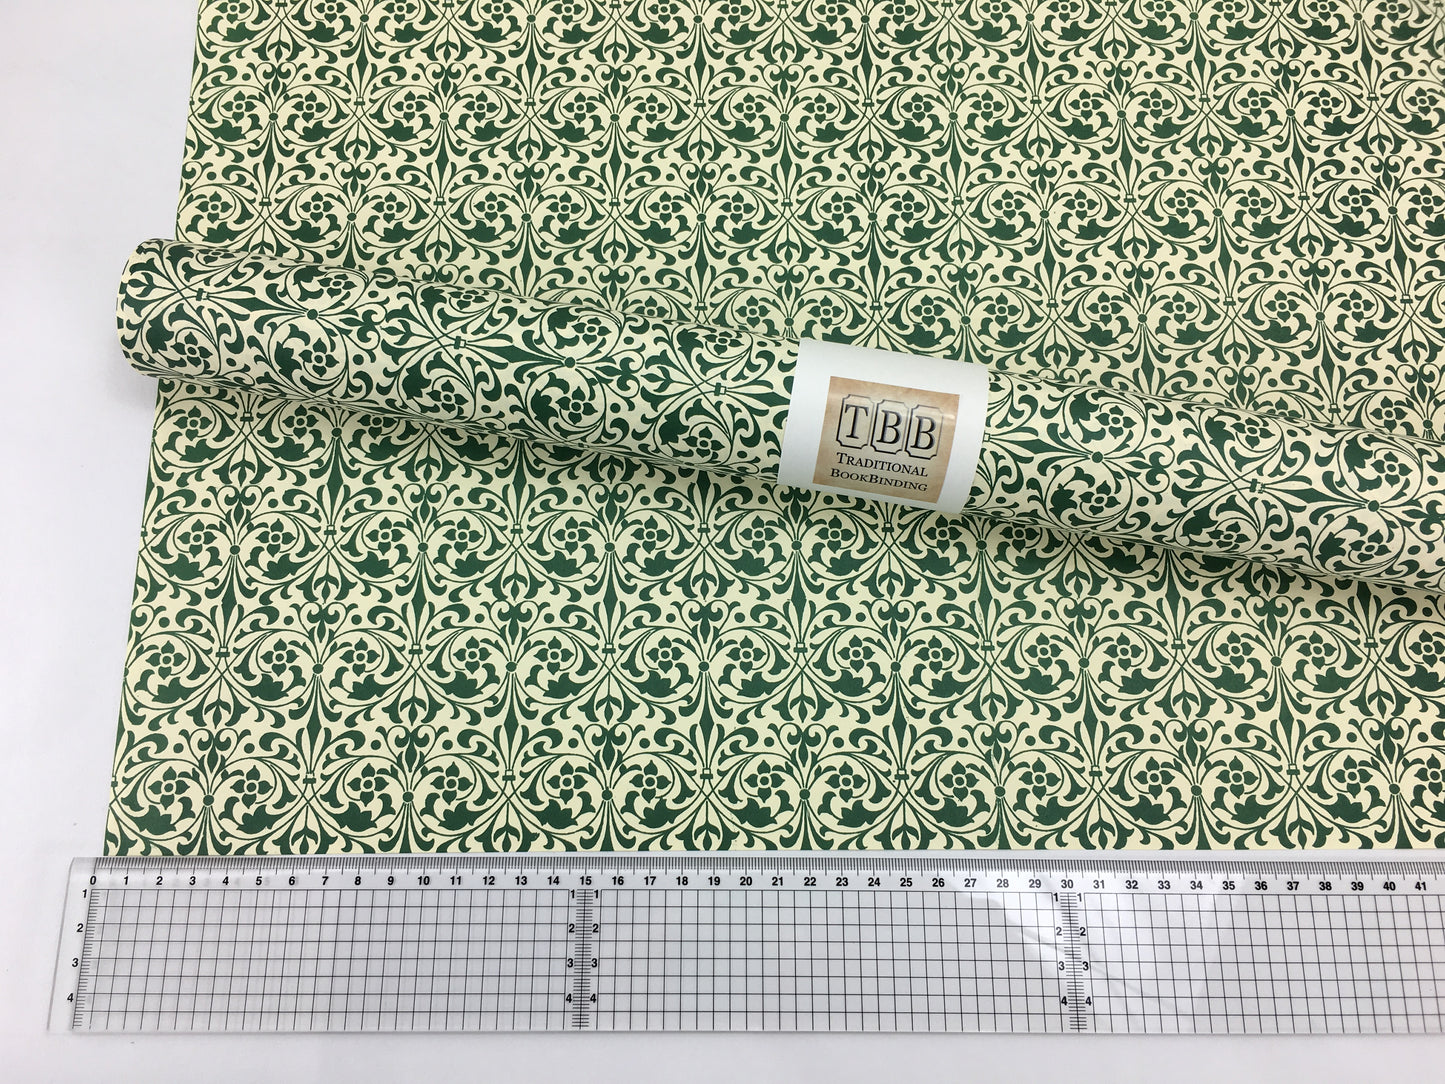 TBBIDP7A-Green- Italian Decorative Paper- 100 GSM Thick paper for bookbinding- Suitable for book covers and end sheets